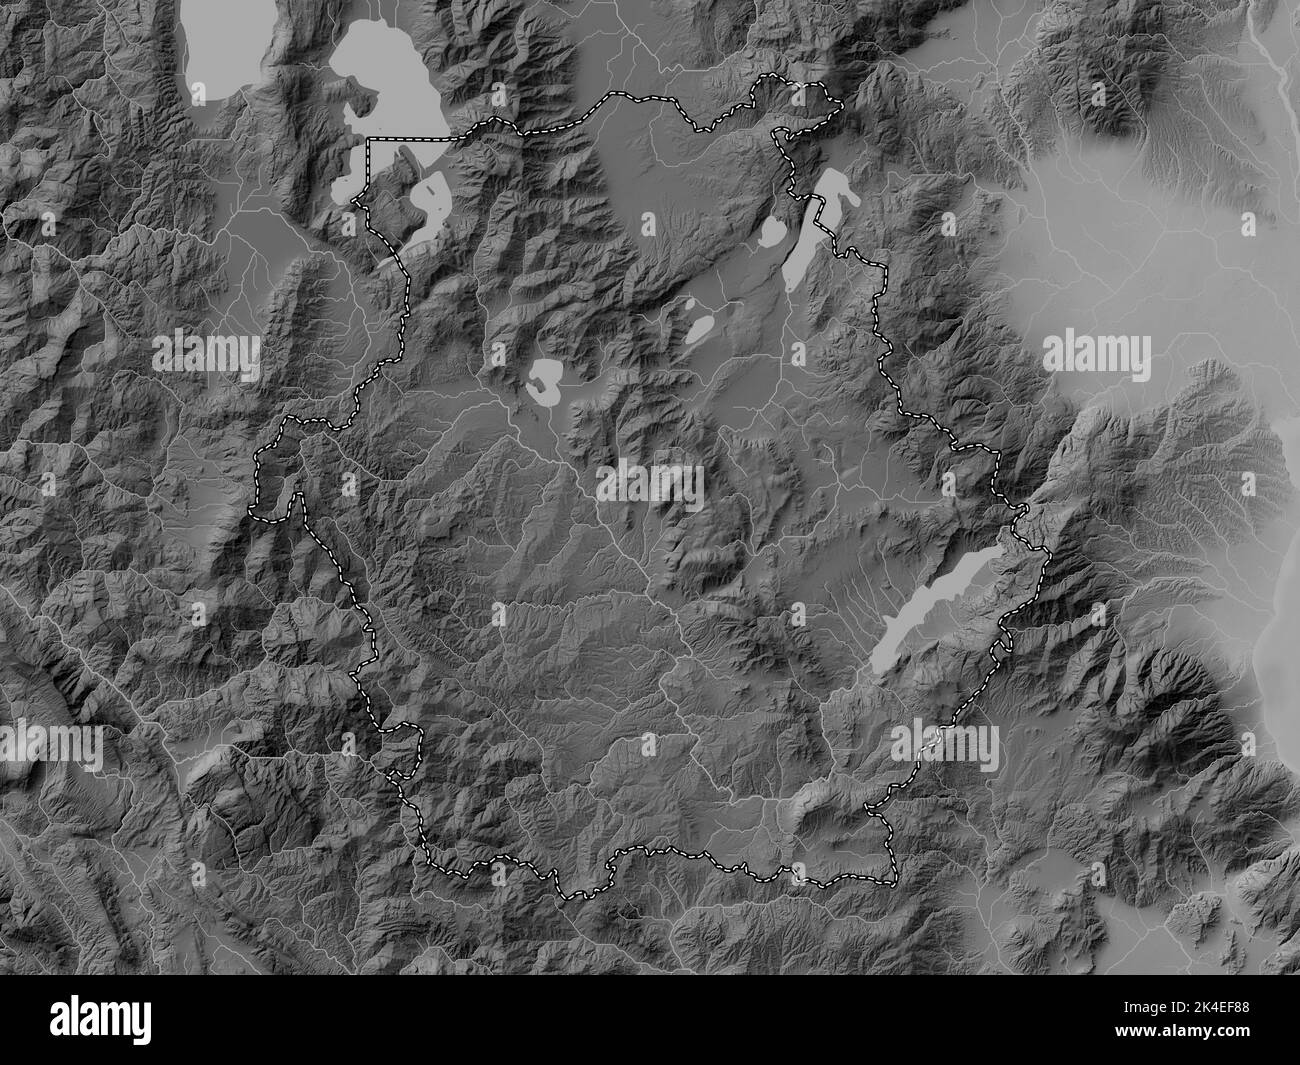 Western Macedonia, decentralized administration of Greece. Grayscale elevation map with lakes and rivers Stock Photo